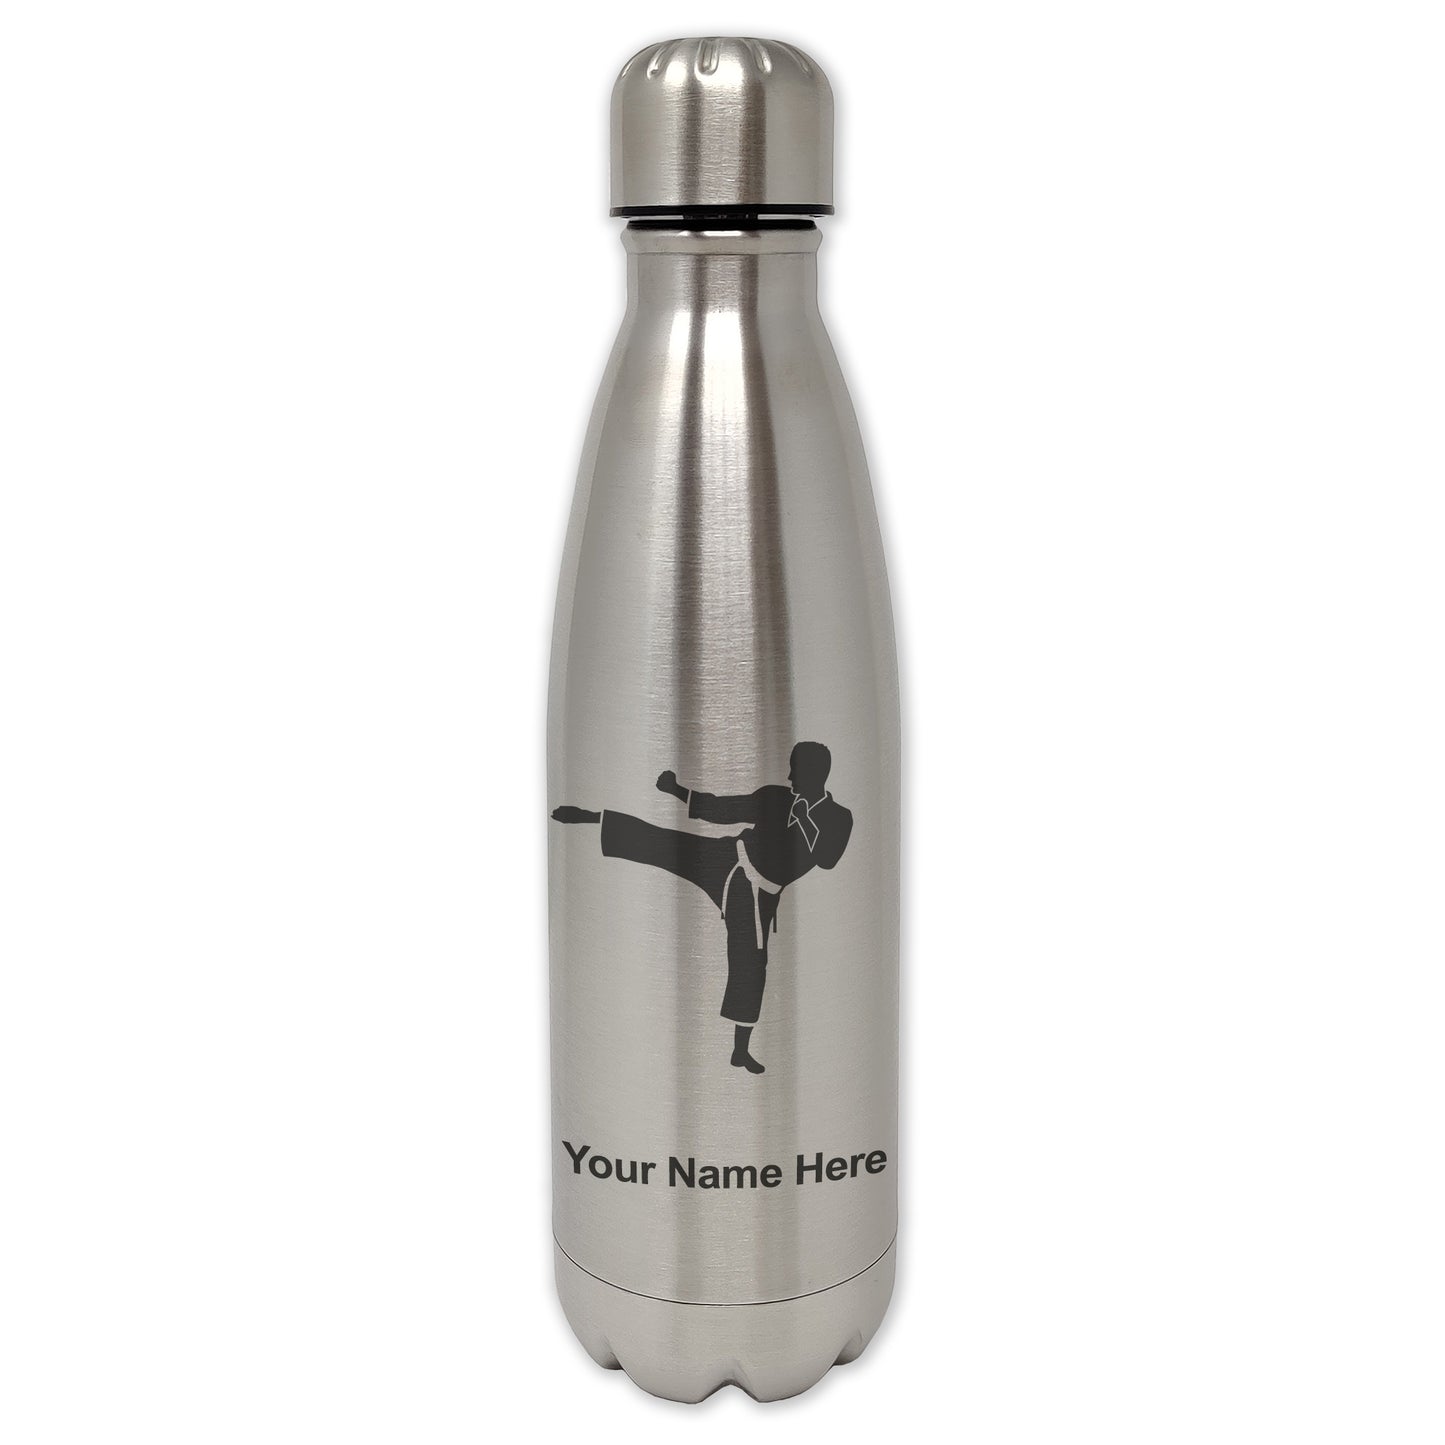 LaserGram Double Wall Water Bottle, Karate Man, Personalized Engraving Included